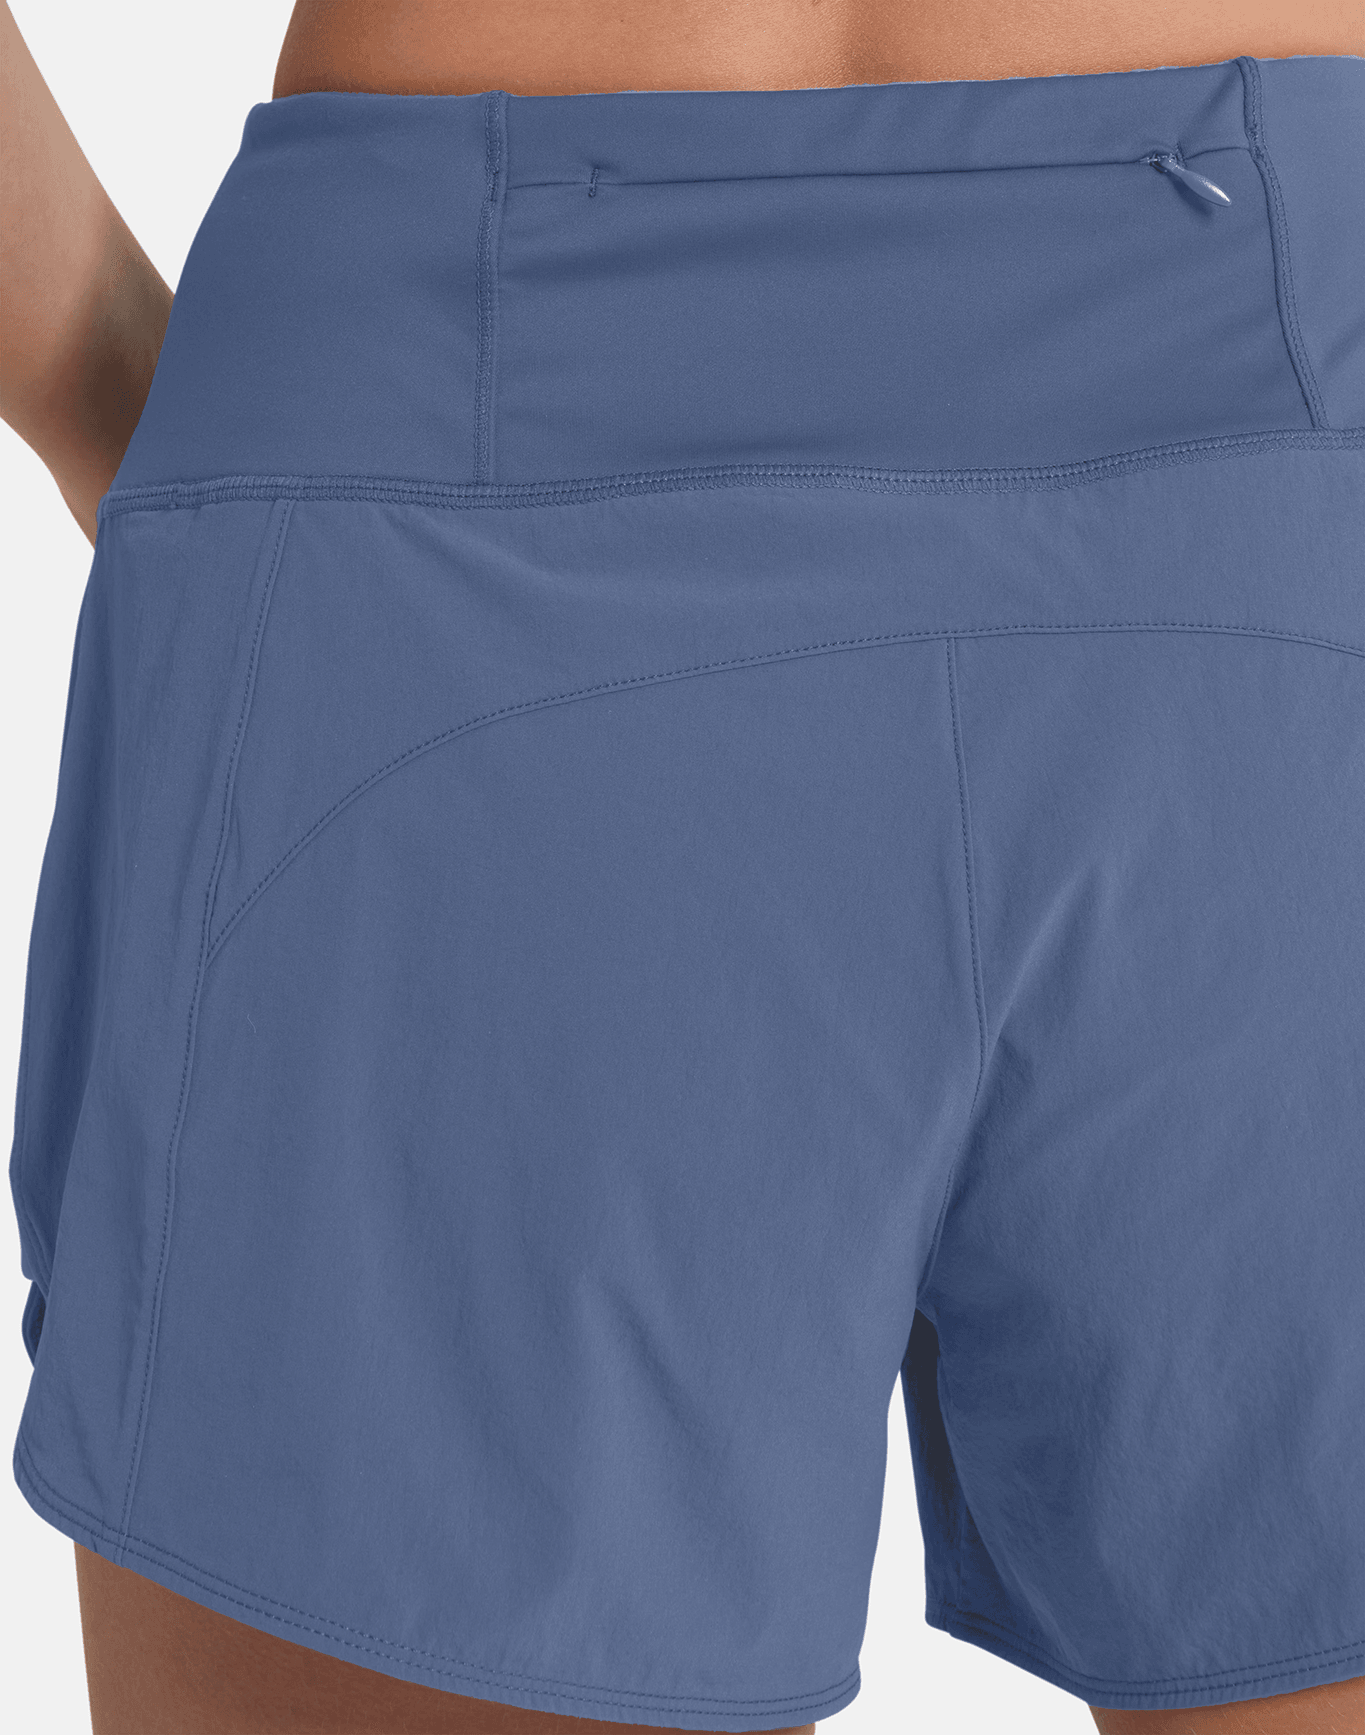 Relentless Shorts in Thunder Blue - Shorts - Windsorbauders IE